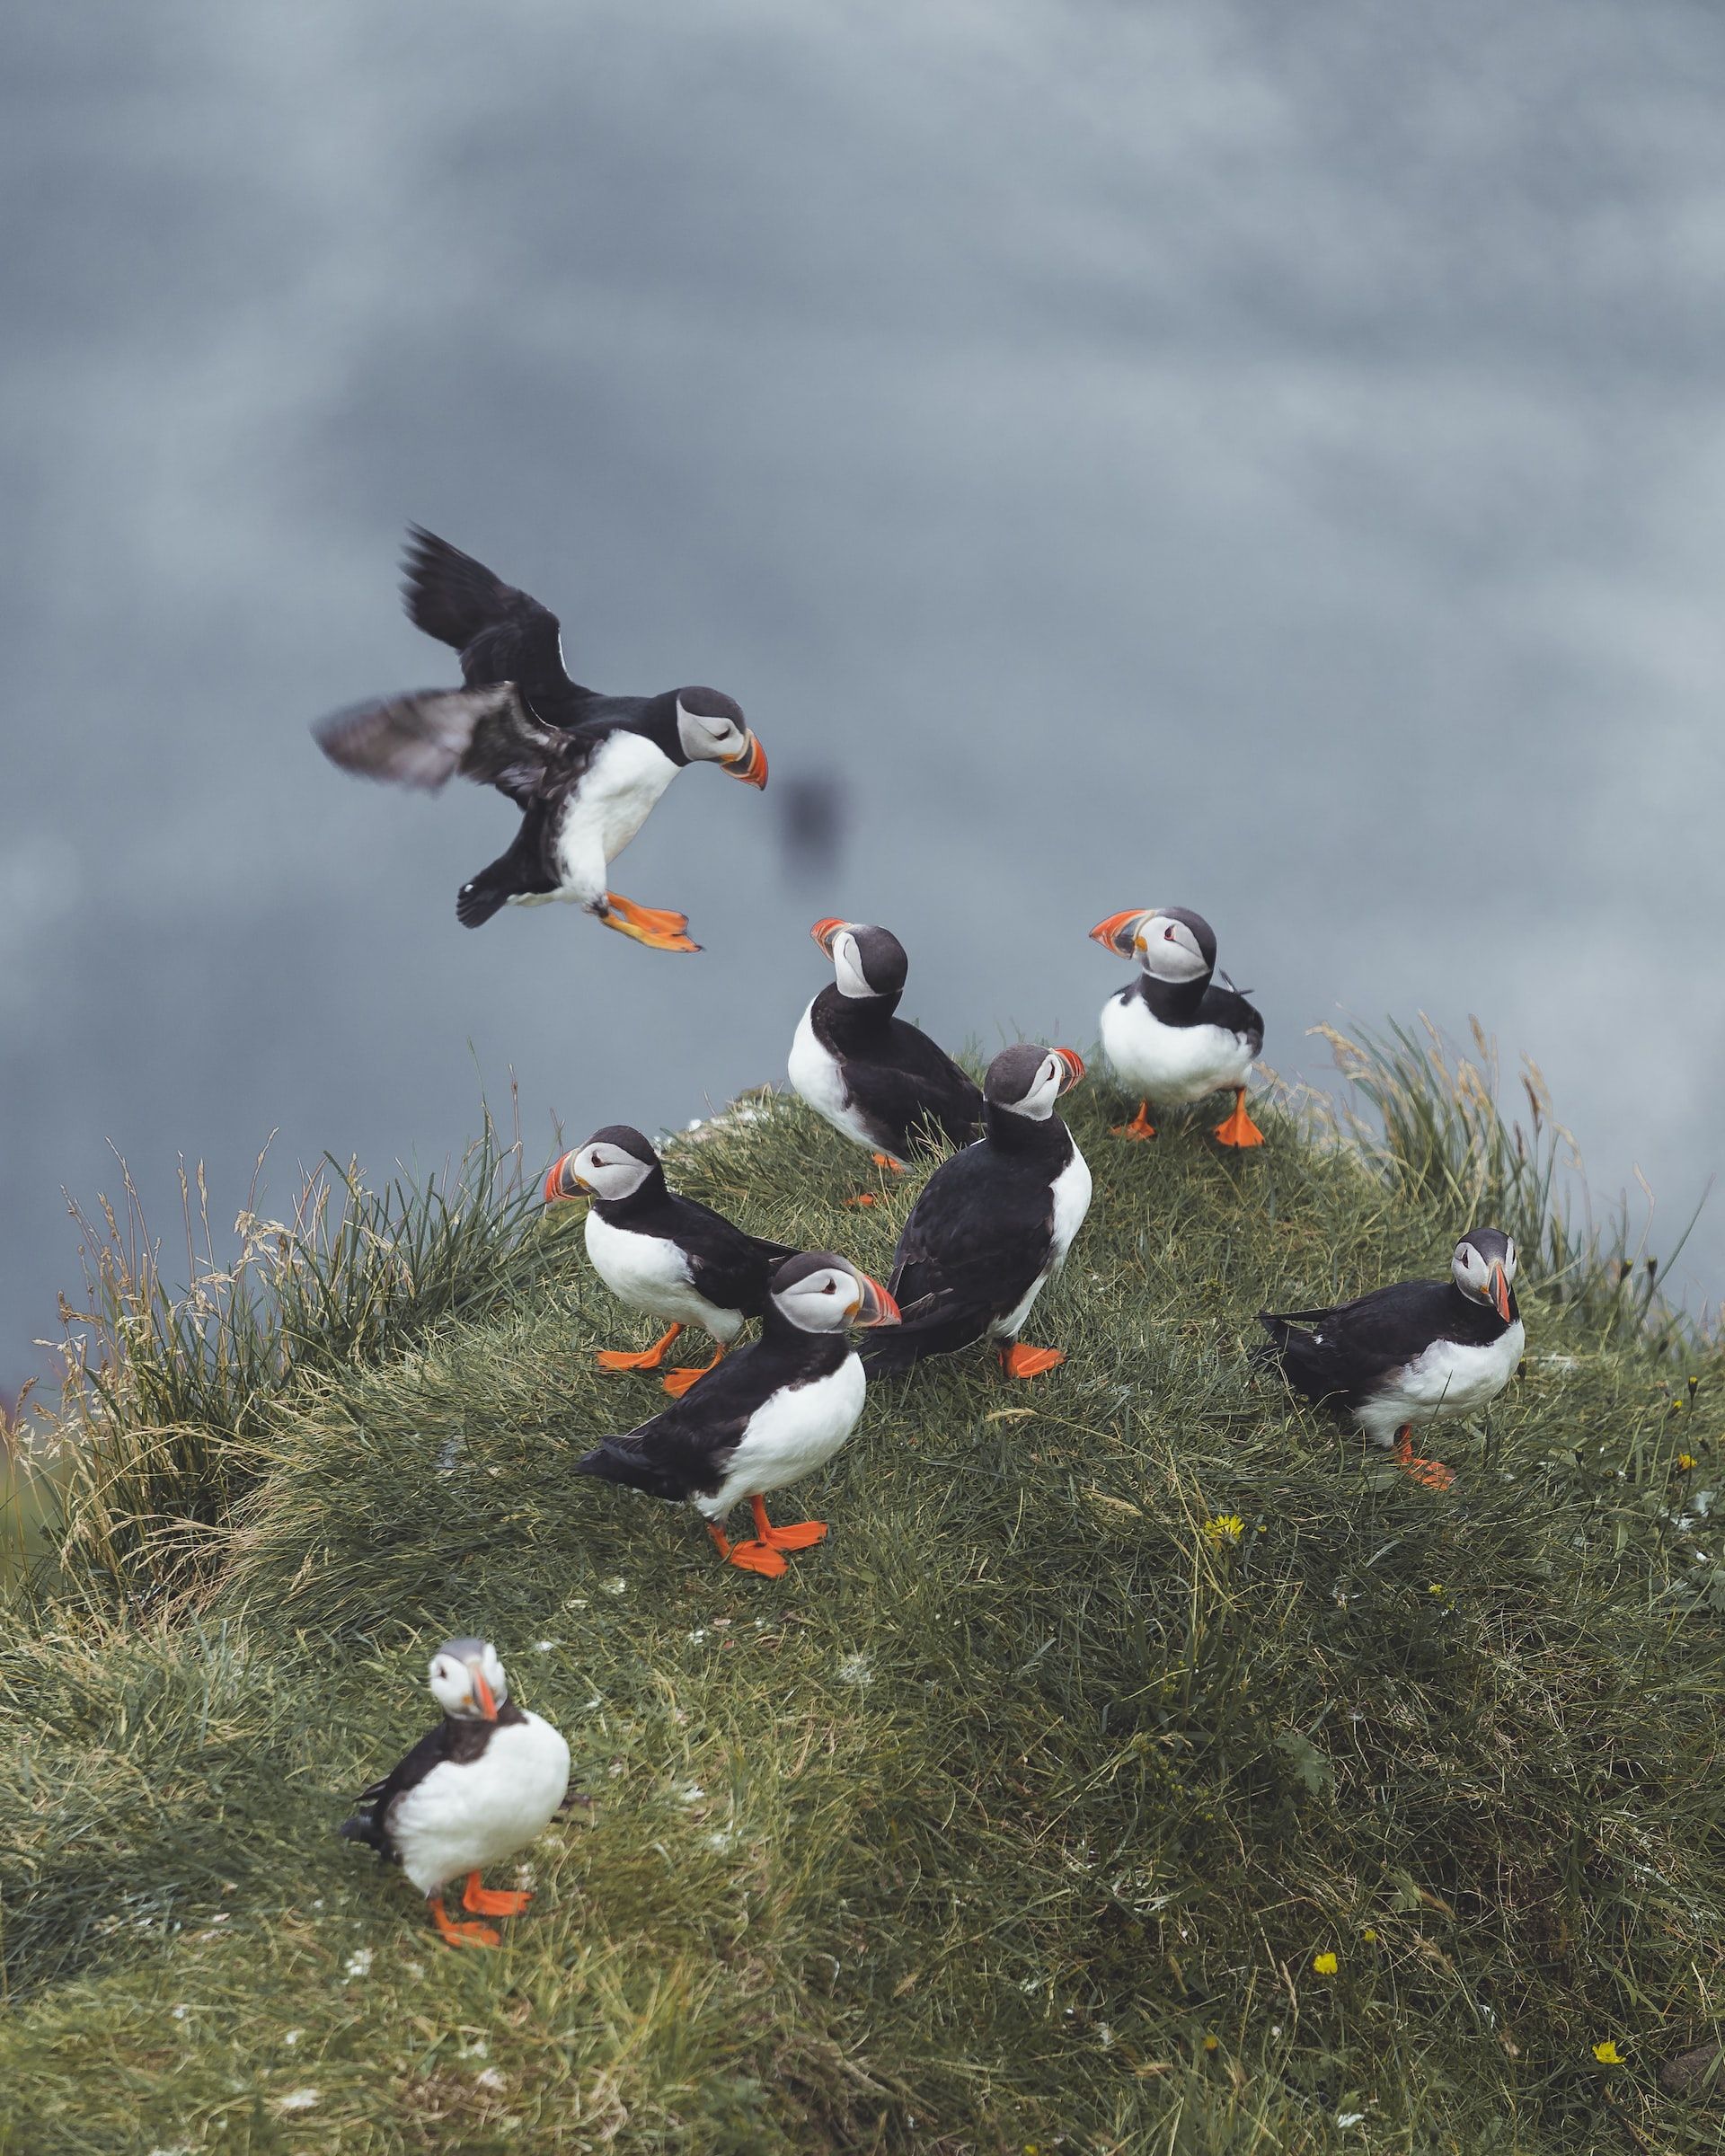 Group of puffins on a grassy cliff in Iceland, with one preparing to land